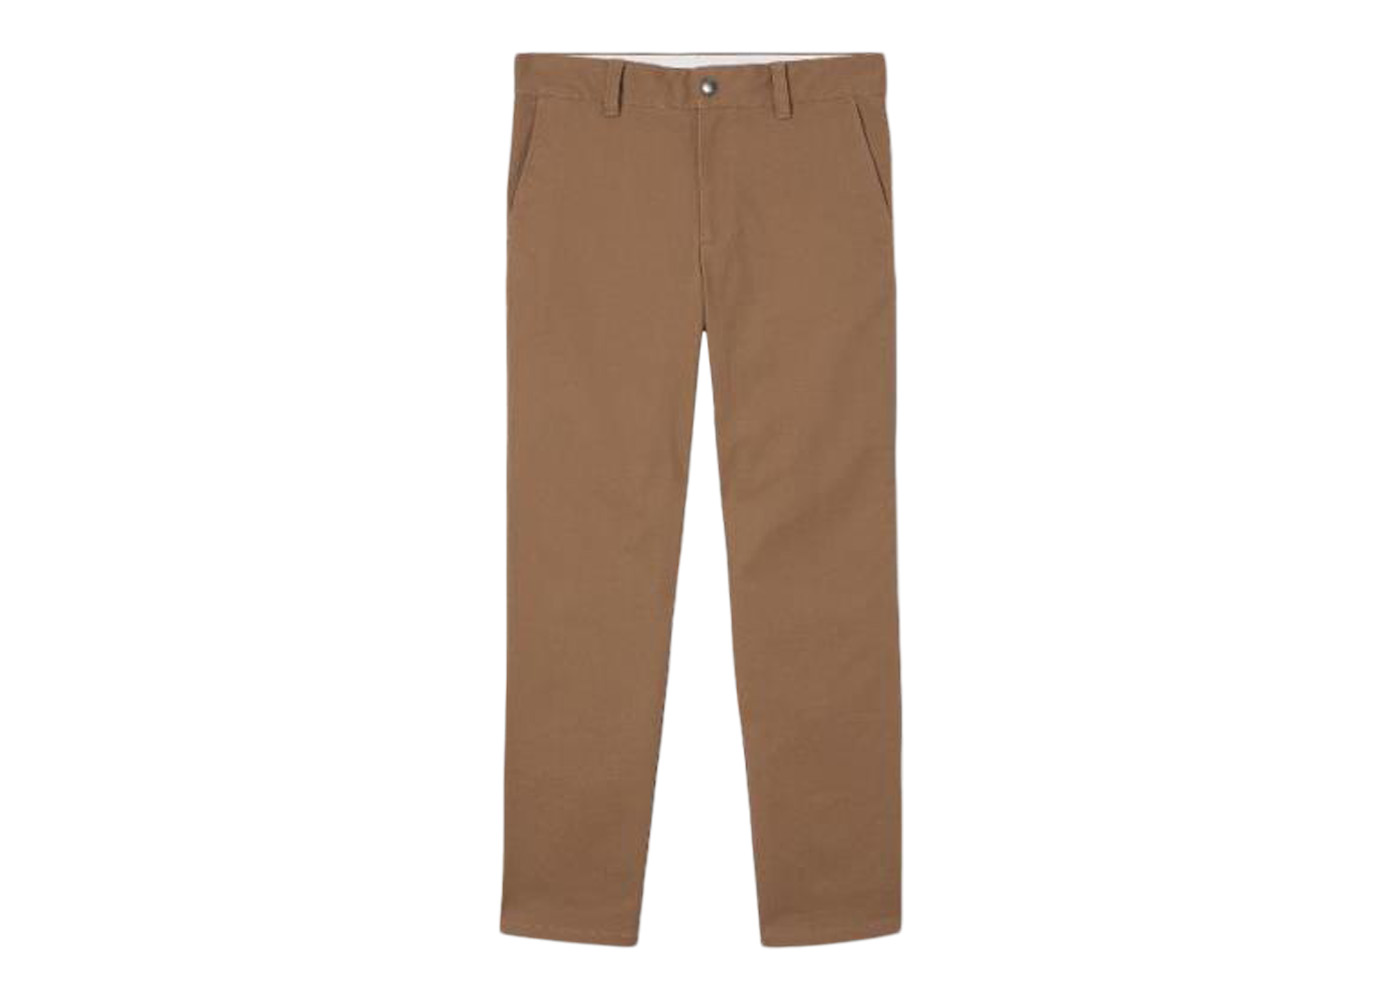 Burberry Slim Fit Virgin Wool Trousers | Pants outfit men, Mens outfits, Mens  pants fashion